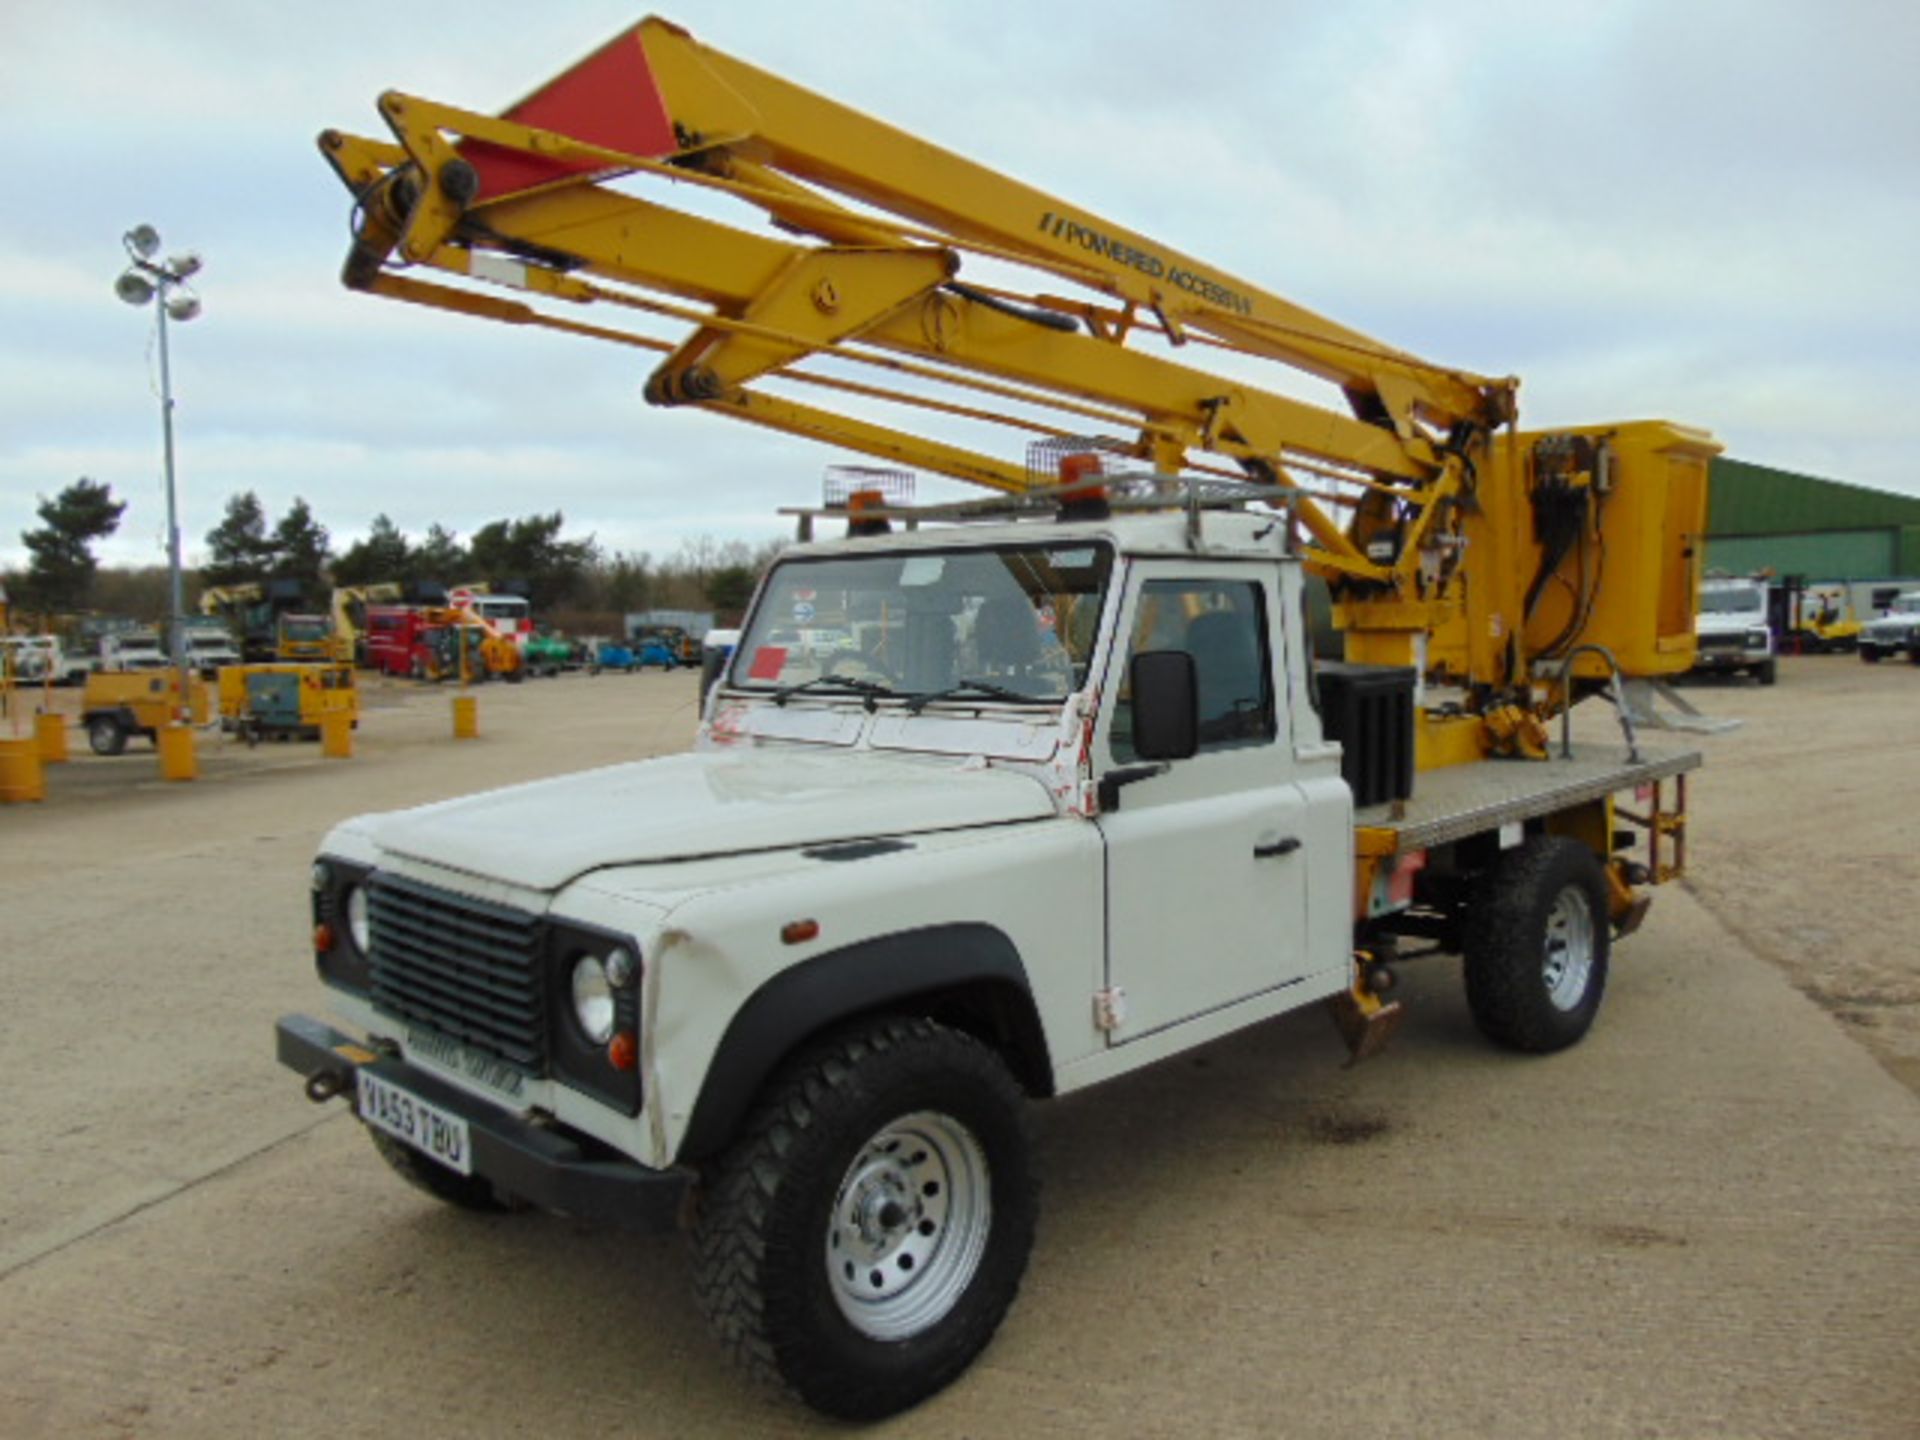 Land Rover Defender 130 TD5 Cherry Picker / Access Lift - Image 6 of 22